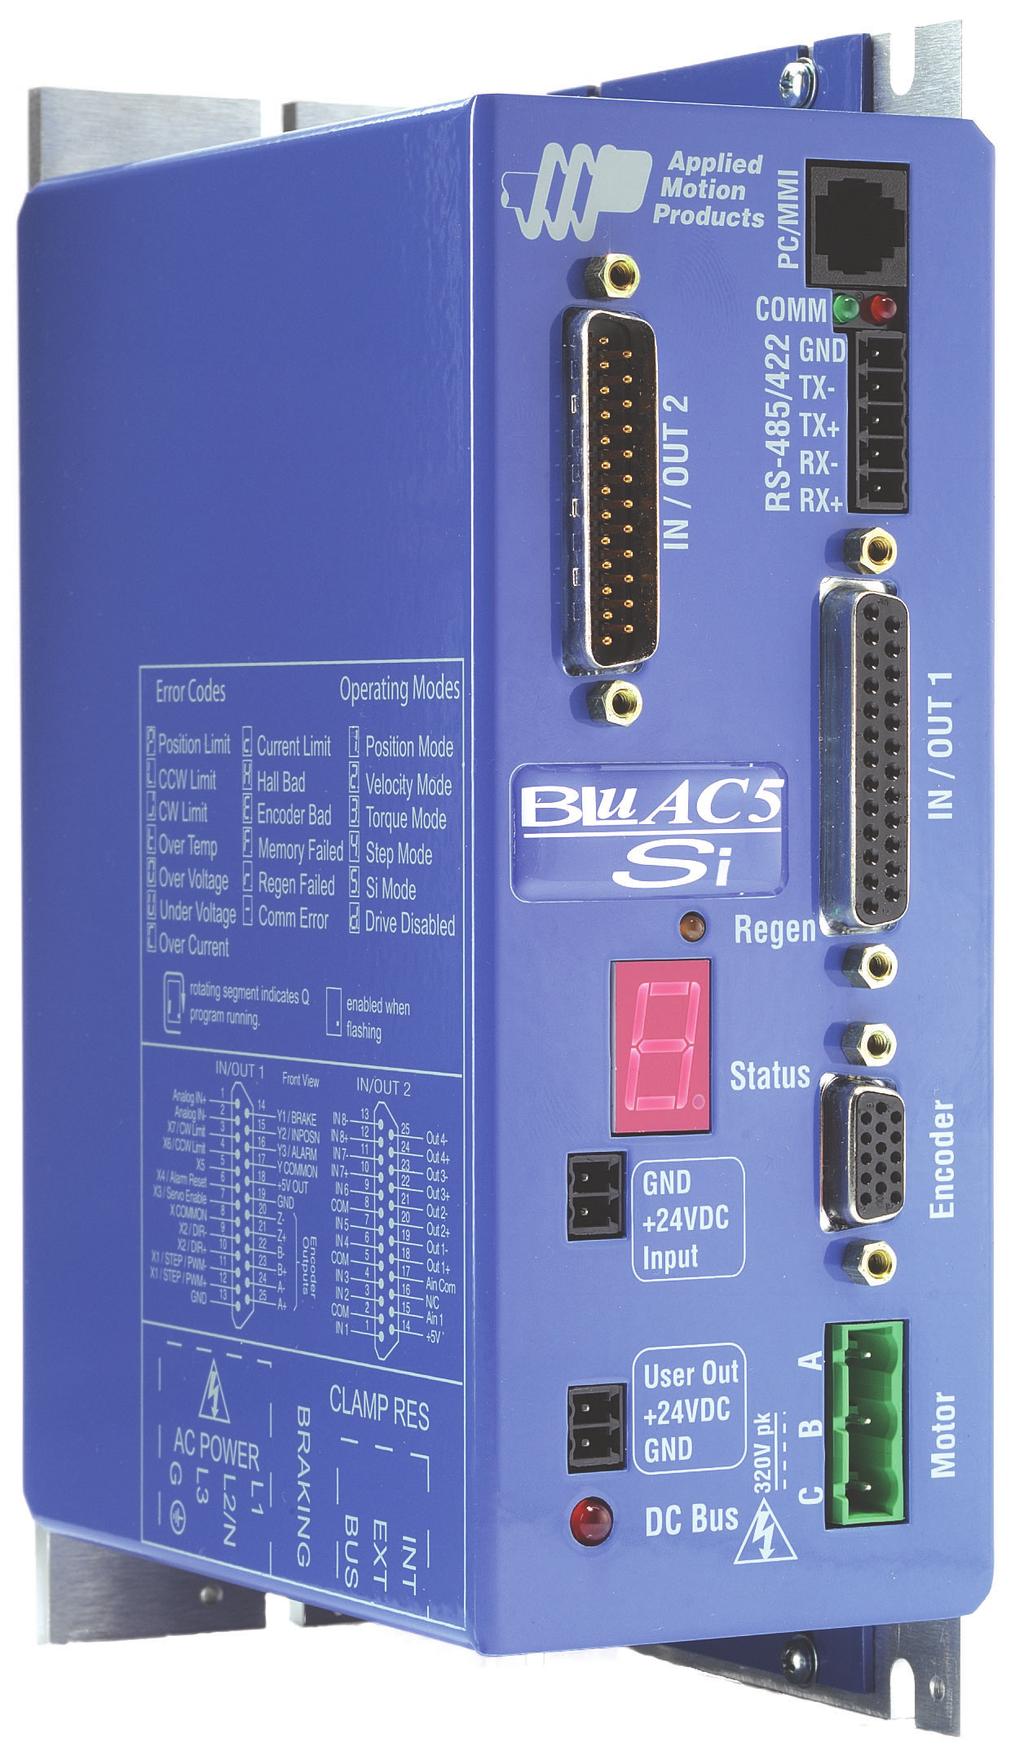 BLuAC5 Brushless Universal Servo Amplifier Description The BLu Series servo drives provide compact, reliable solutions for a wide range of motion applications in a variety of industries.